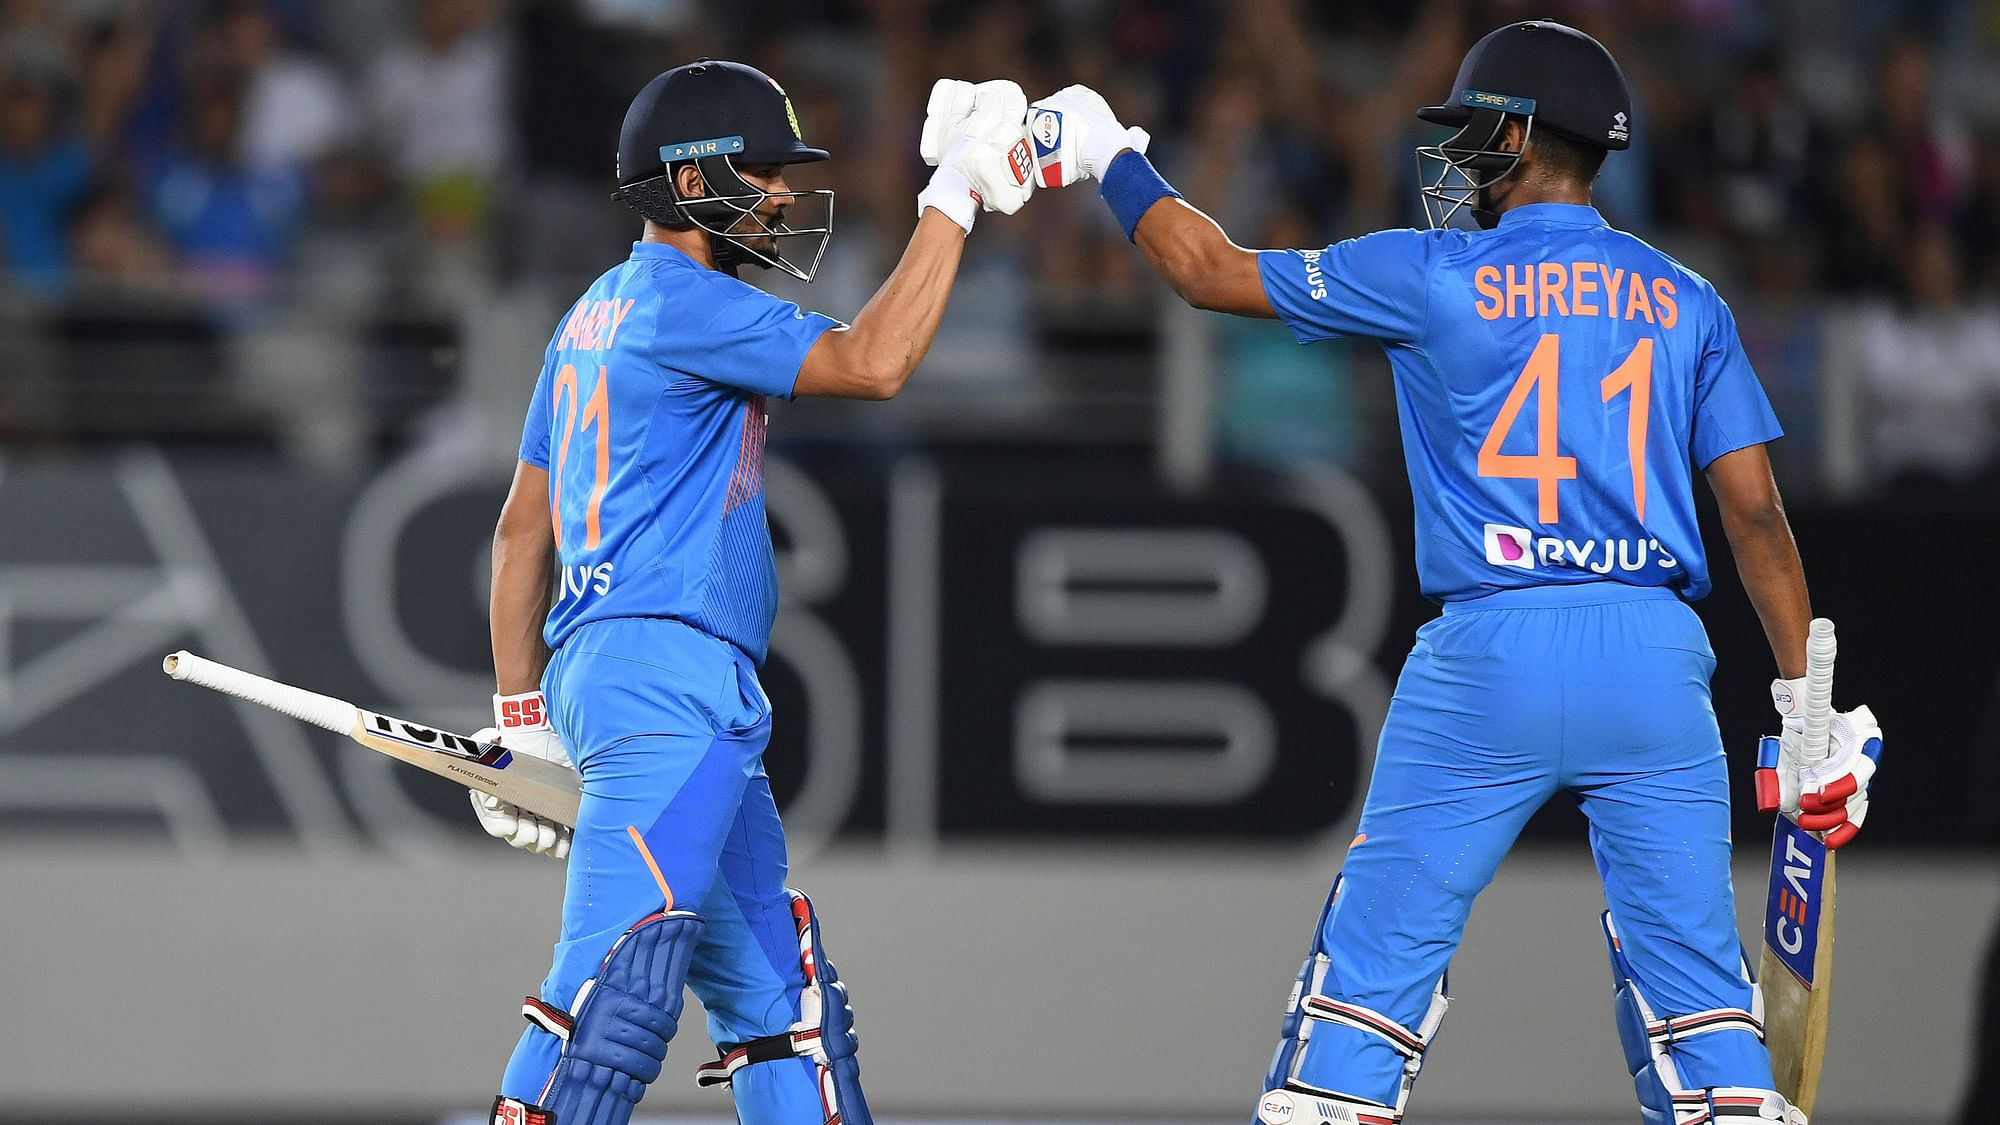 LIVE Cricket Score: Live updates from the T20I series-opener between New Zealand and India.